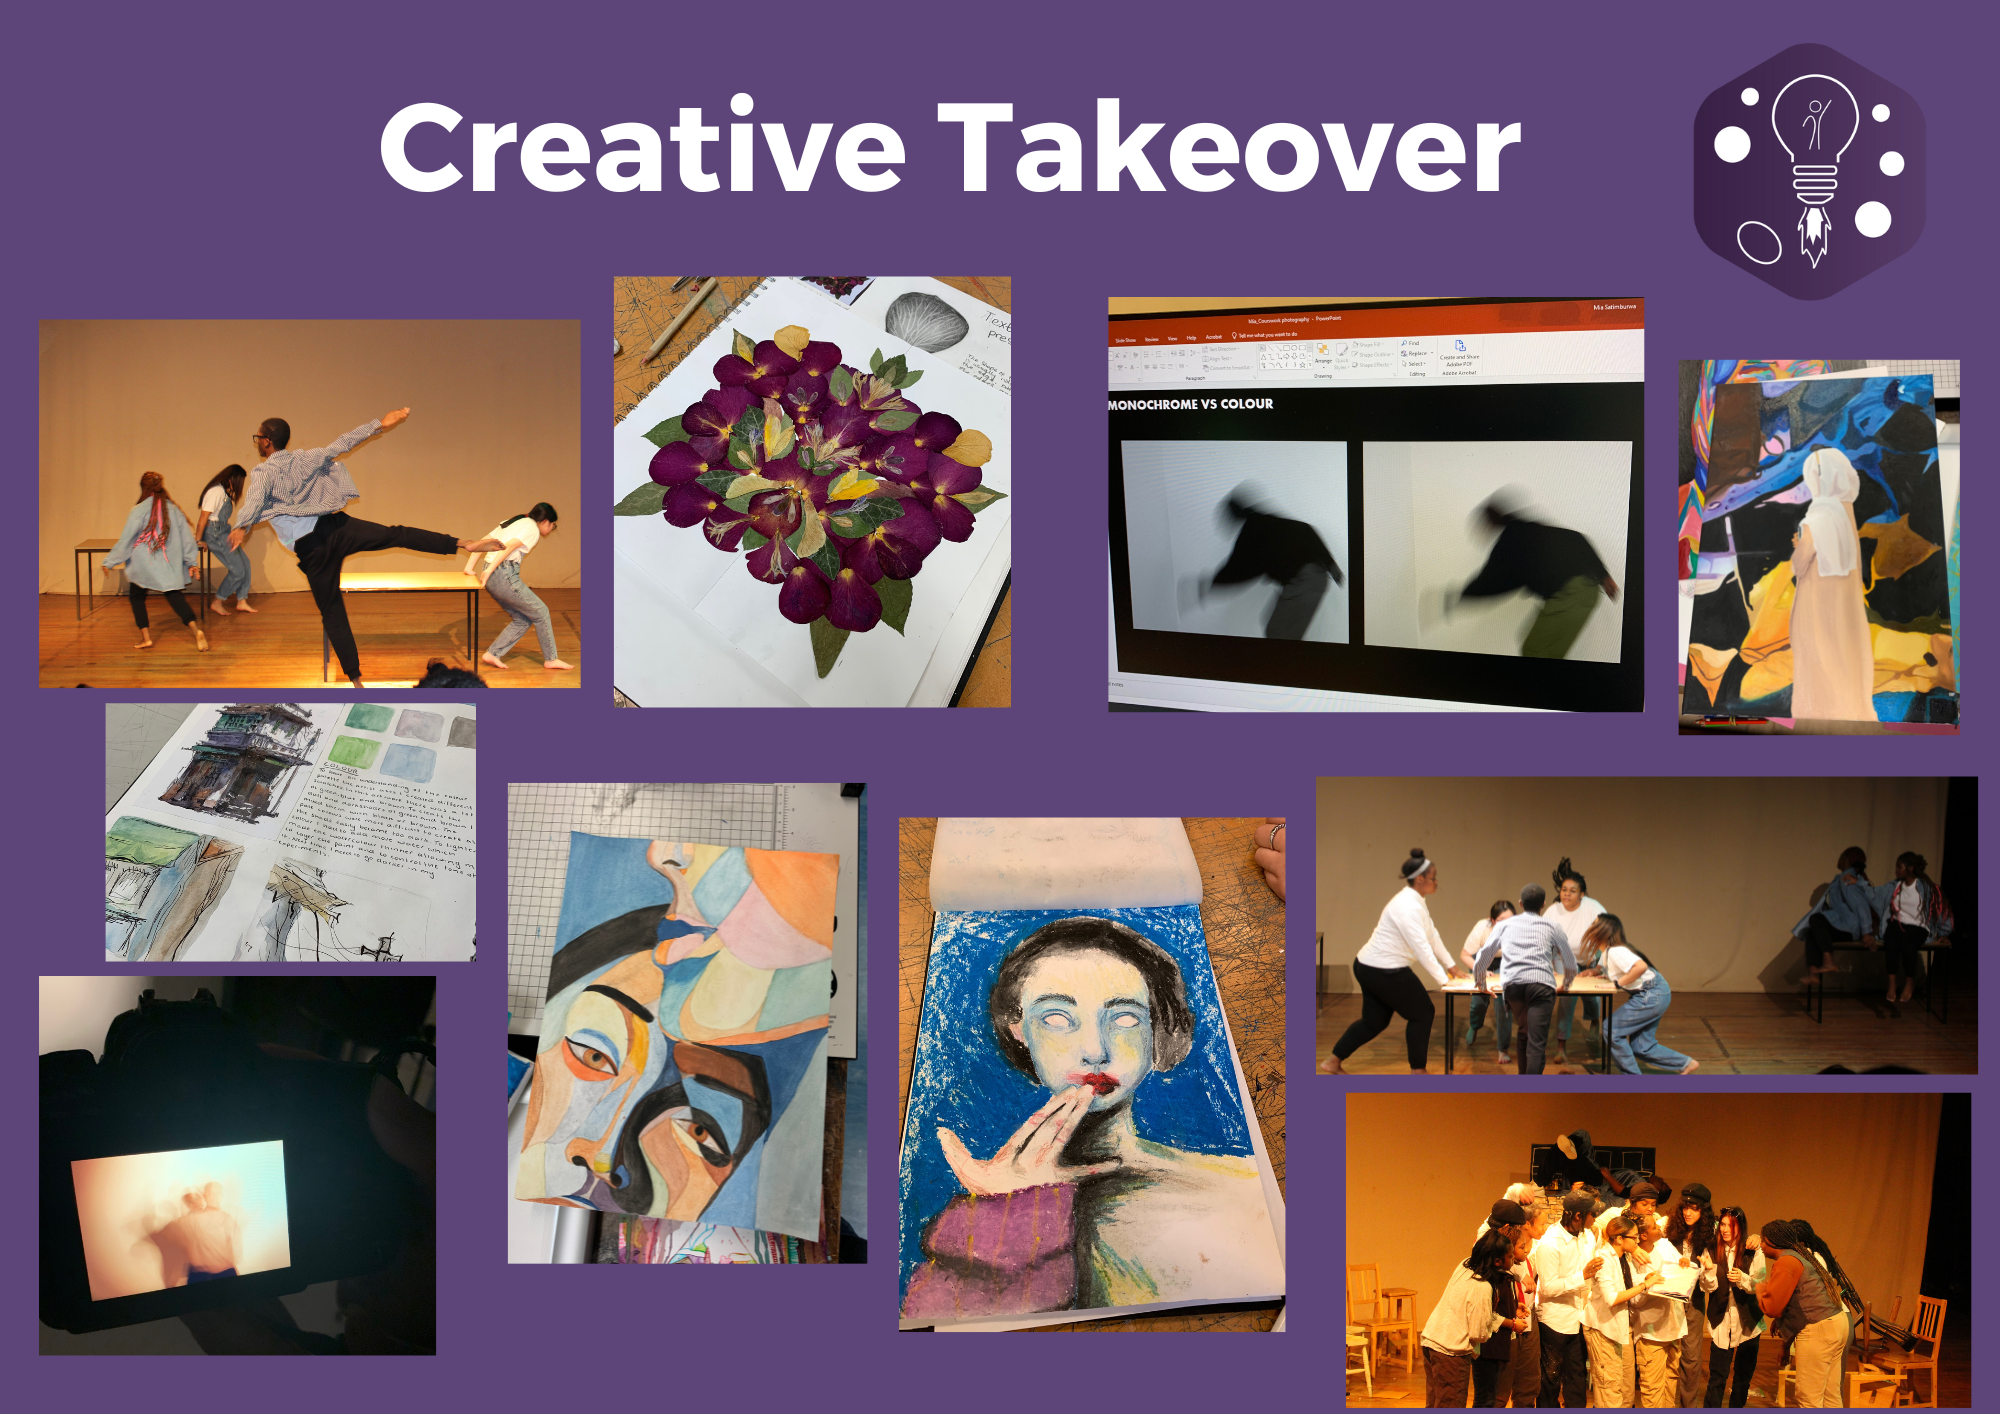 Creative Takeover